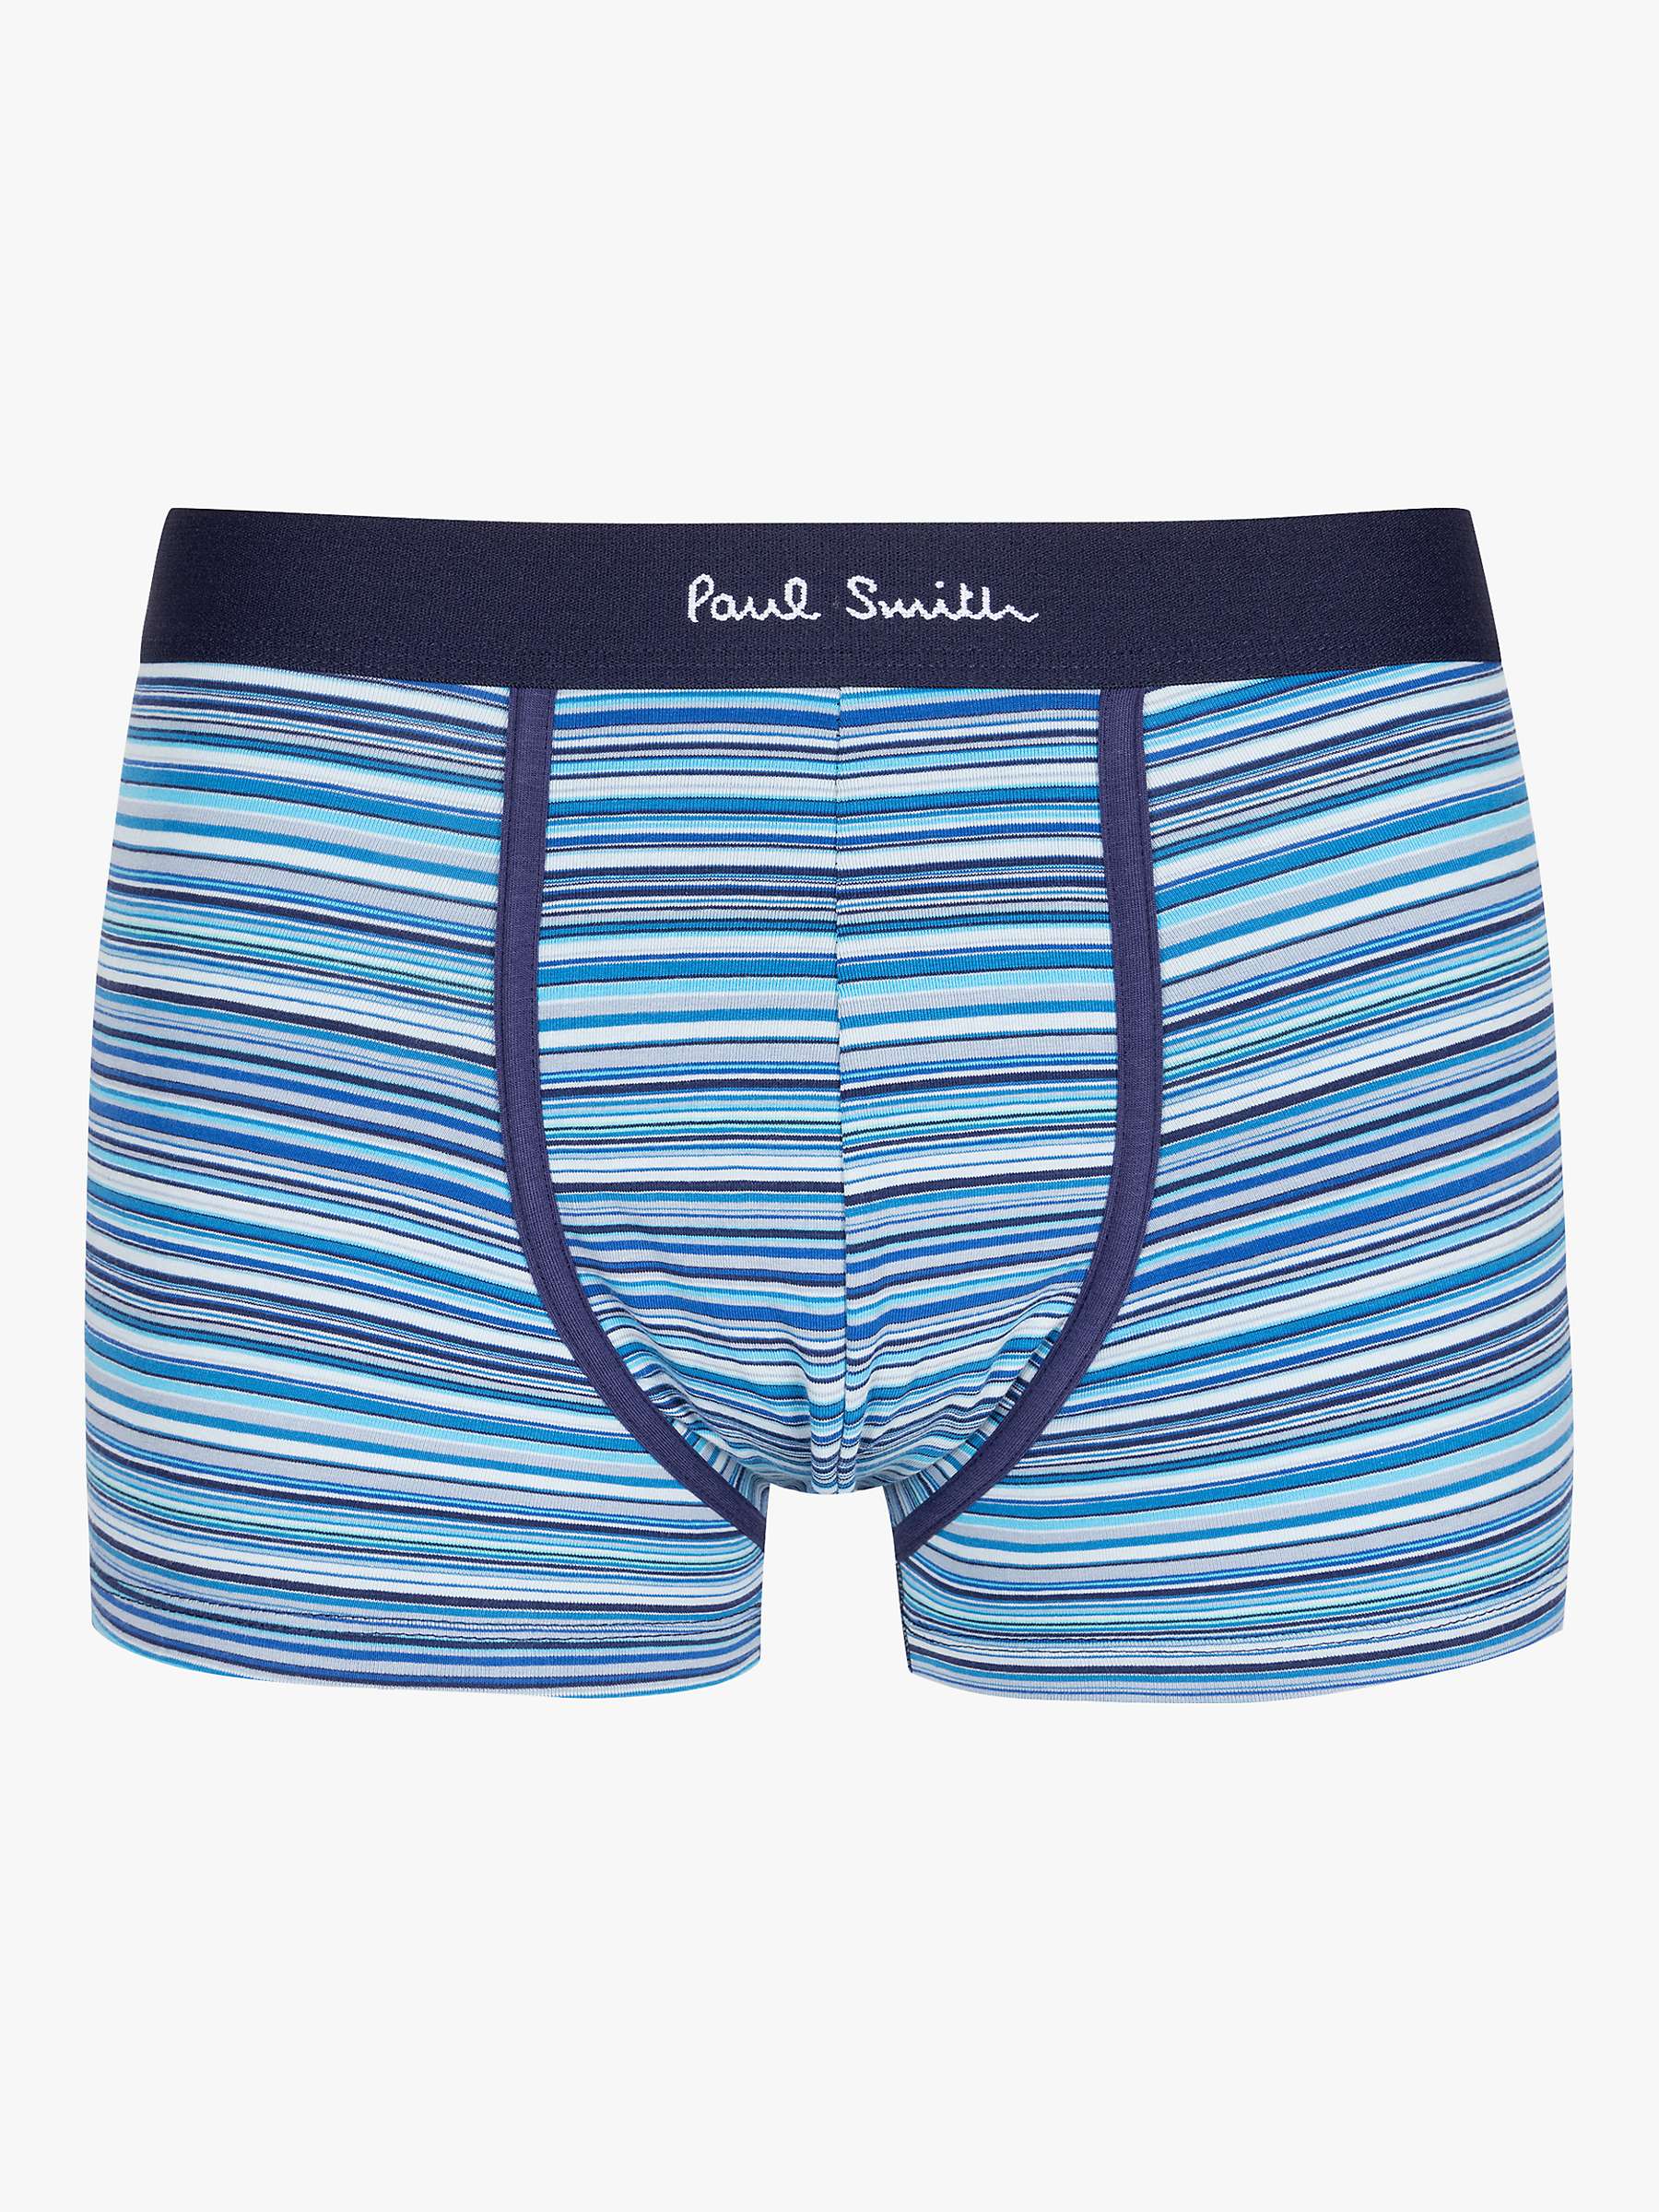 Mens Clothing Underwear Boxers Paul Smith Stretch Cotton Trunks 3 Pack in Blue for Men 